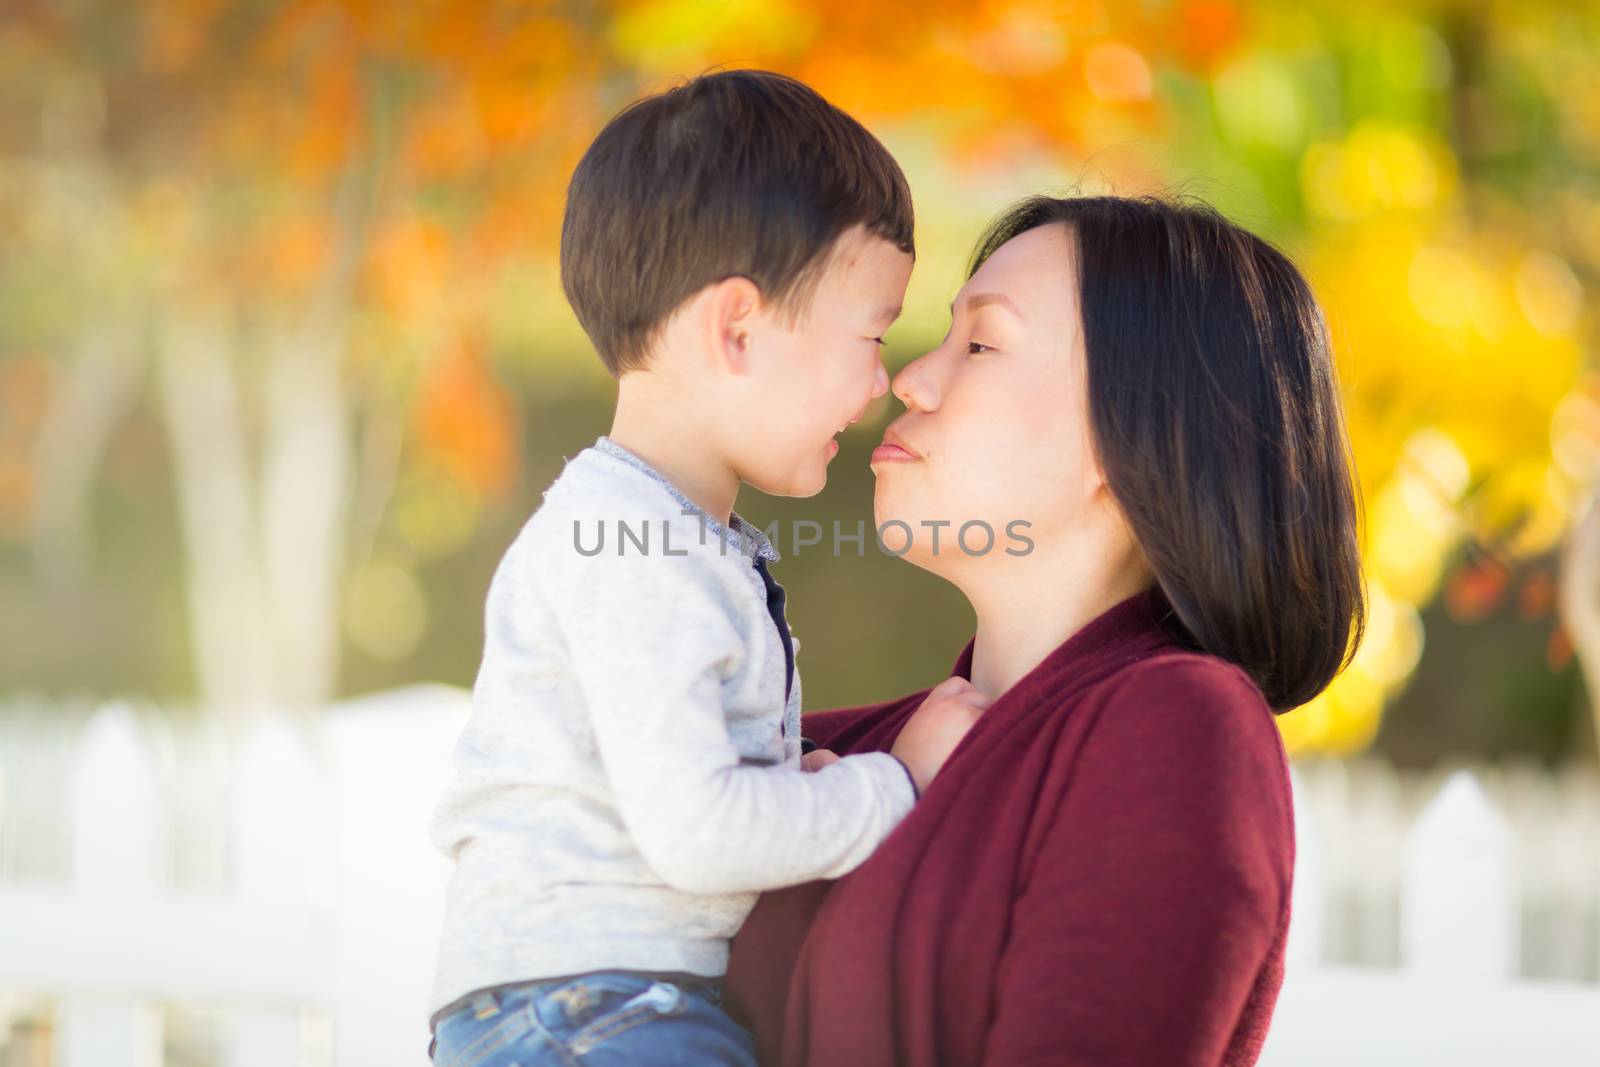 Chinese Mother Having Fun with Her Mixed Race Baby Son by Feverpitched